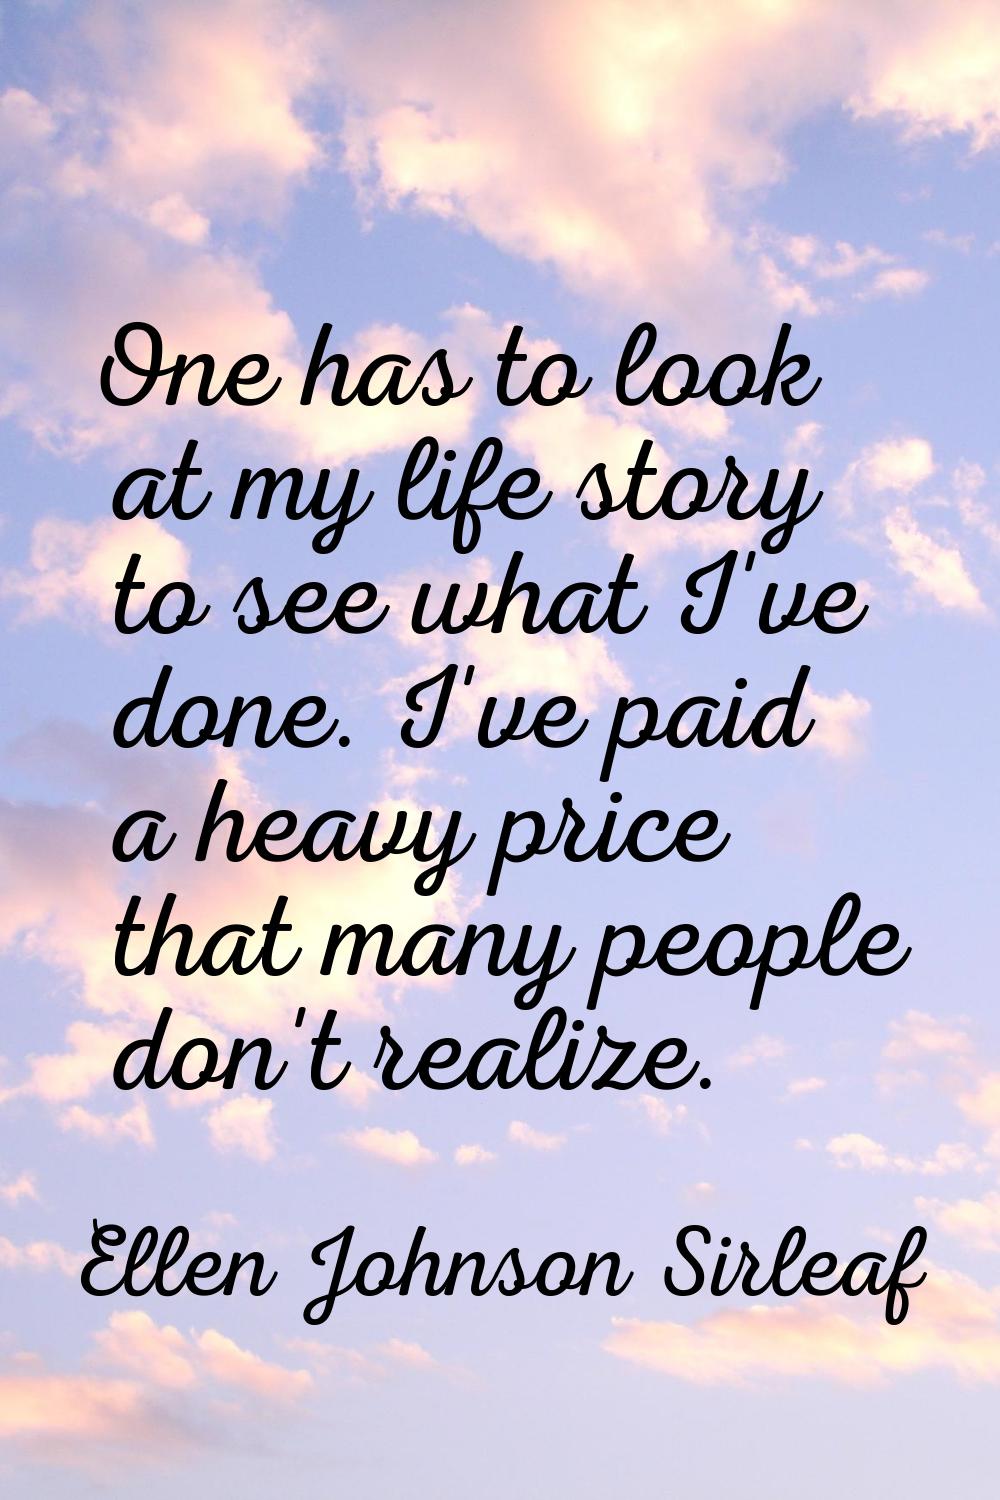 One has to look at my life story to see what I've done. I've paid a heavy price that many people do